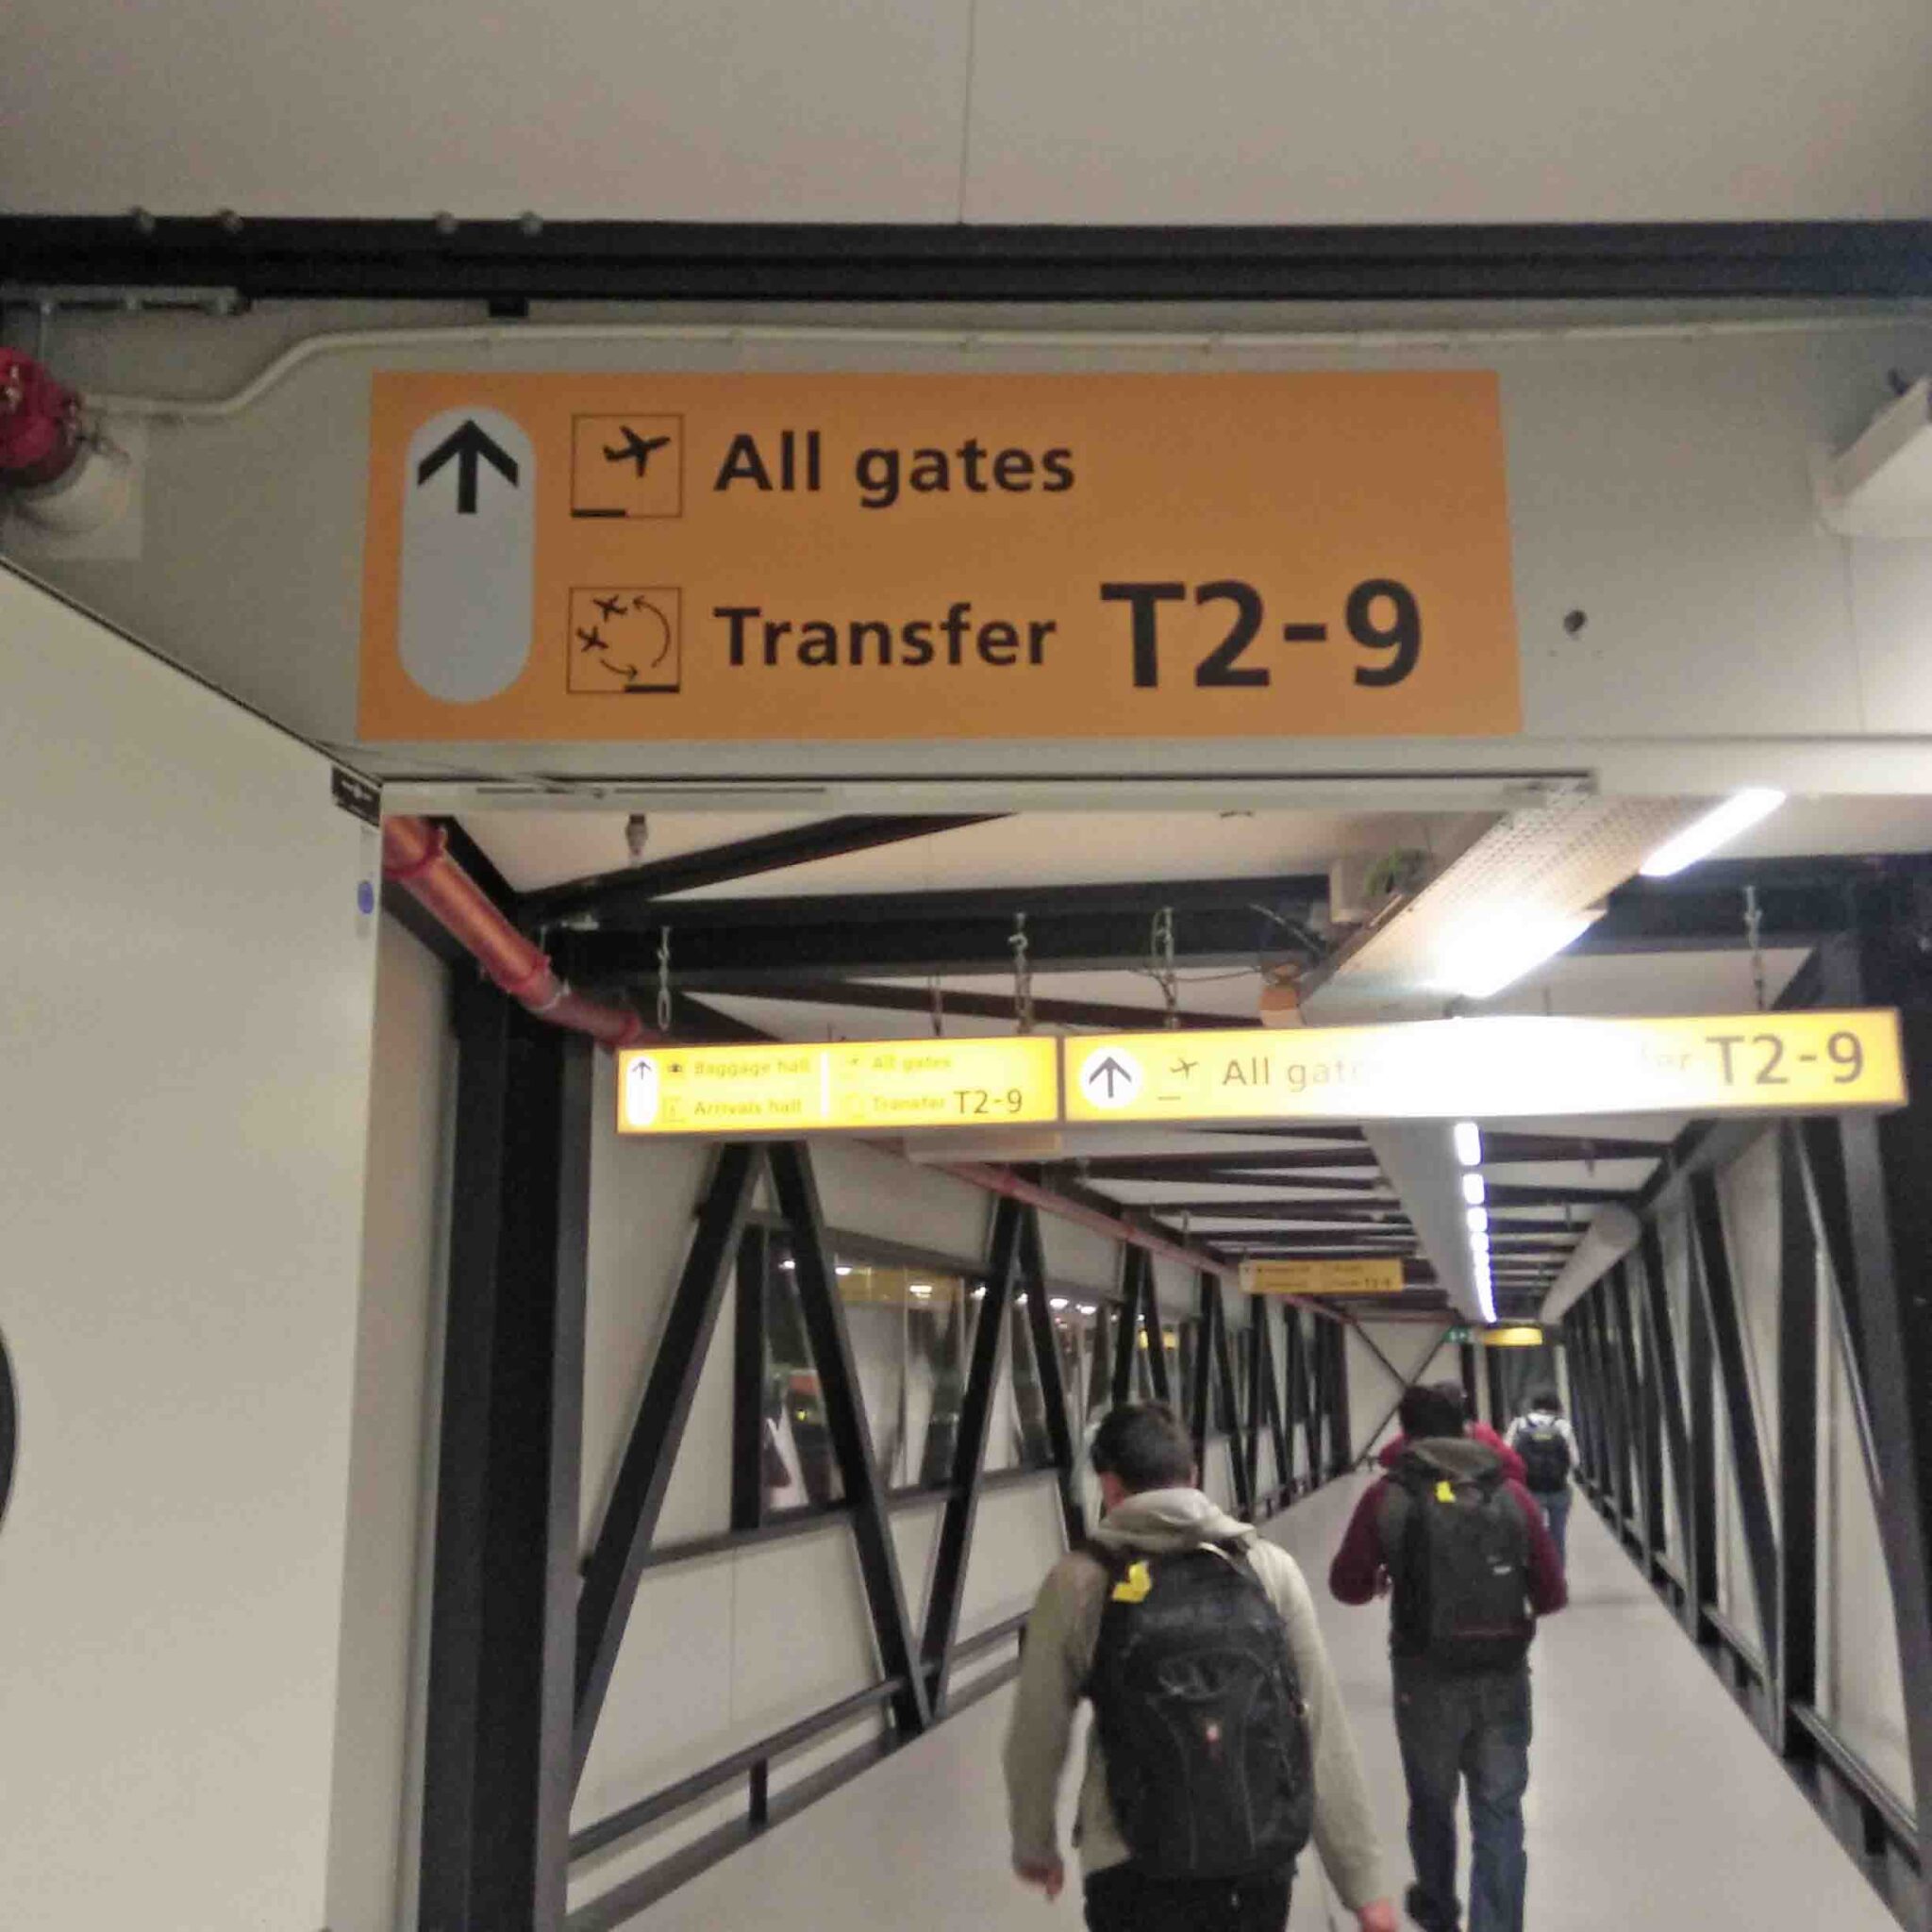 All gates and Transfers upon arriving at Schiphol Airport, Amsterdam for my connecting flight.